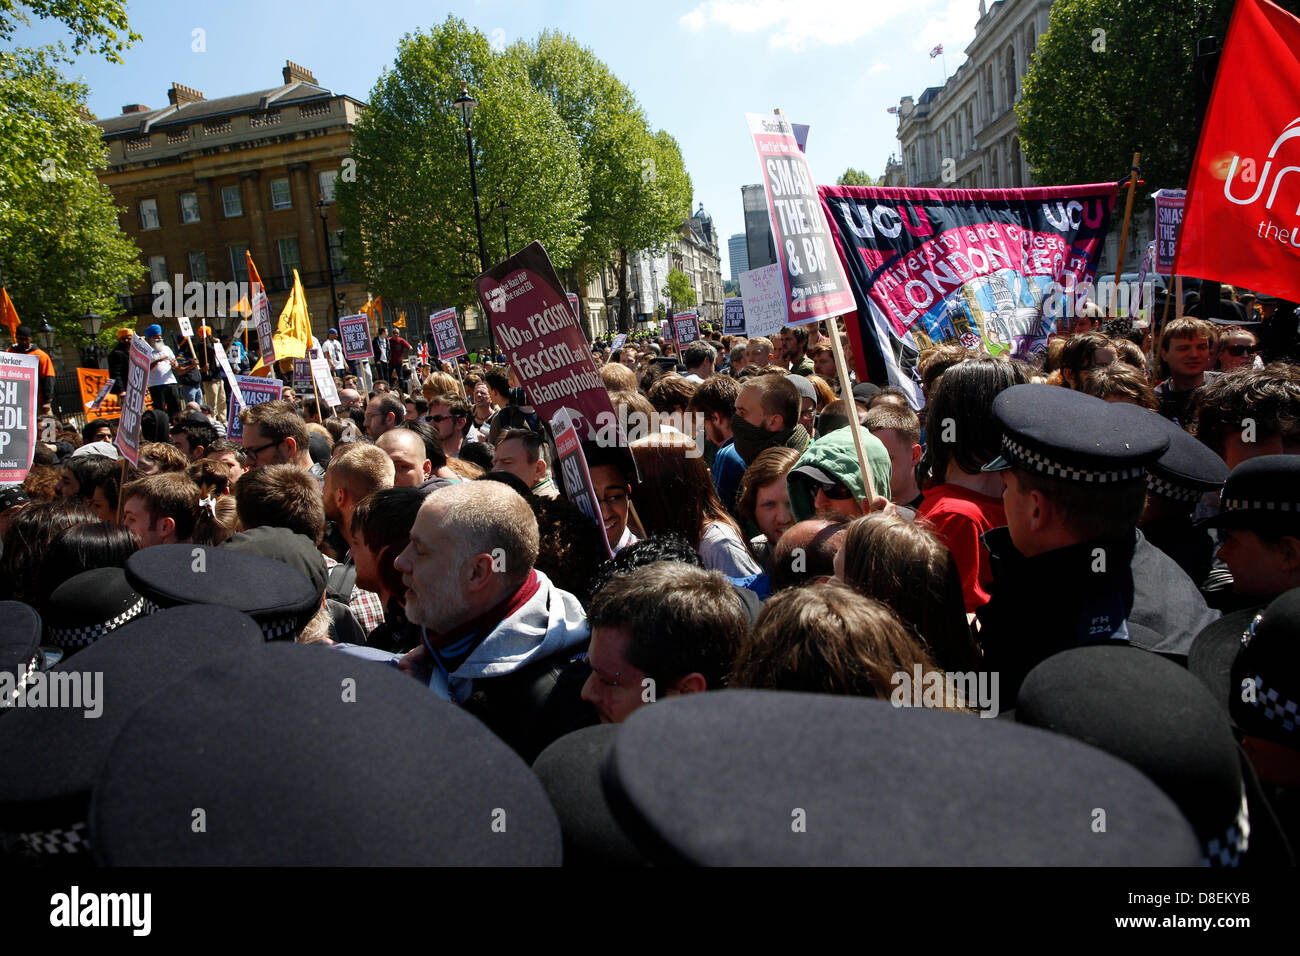 London, UK. 27th May, 2013. EDL marched to Downing street under strict police supervision while the UAF were holding a counter protest. some minor clashes with the police as UAF people tries to break through the police line Credit: Lydia Pagoni/Alamy Live News Stock Photo